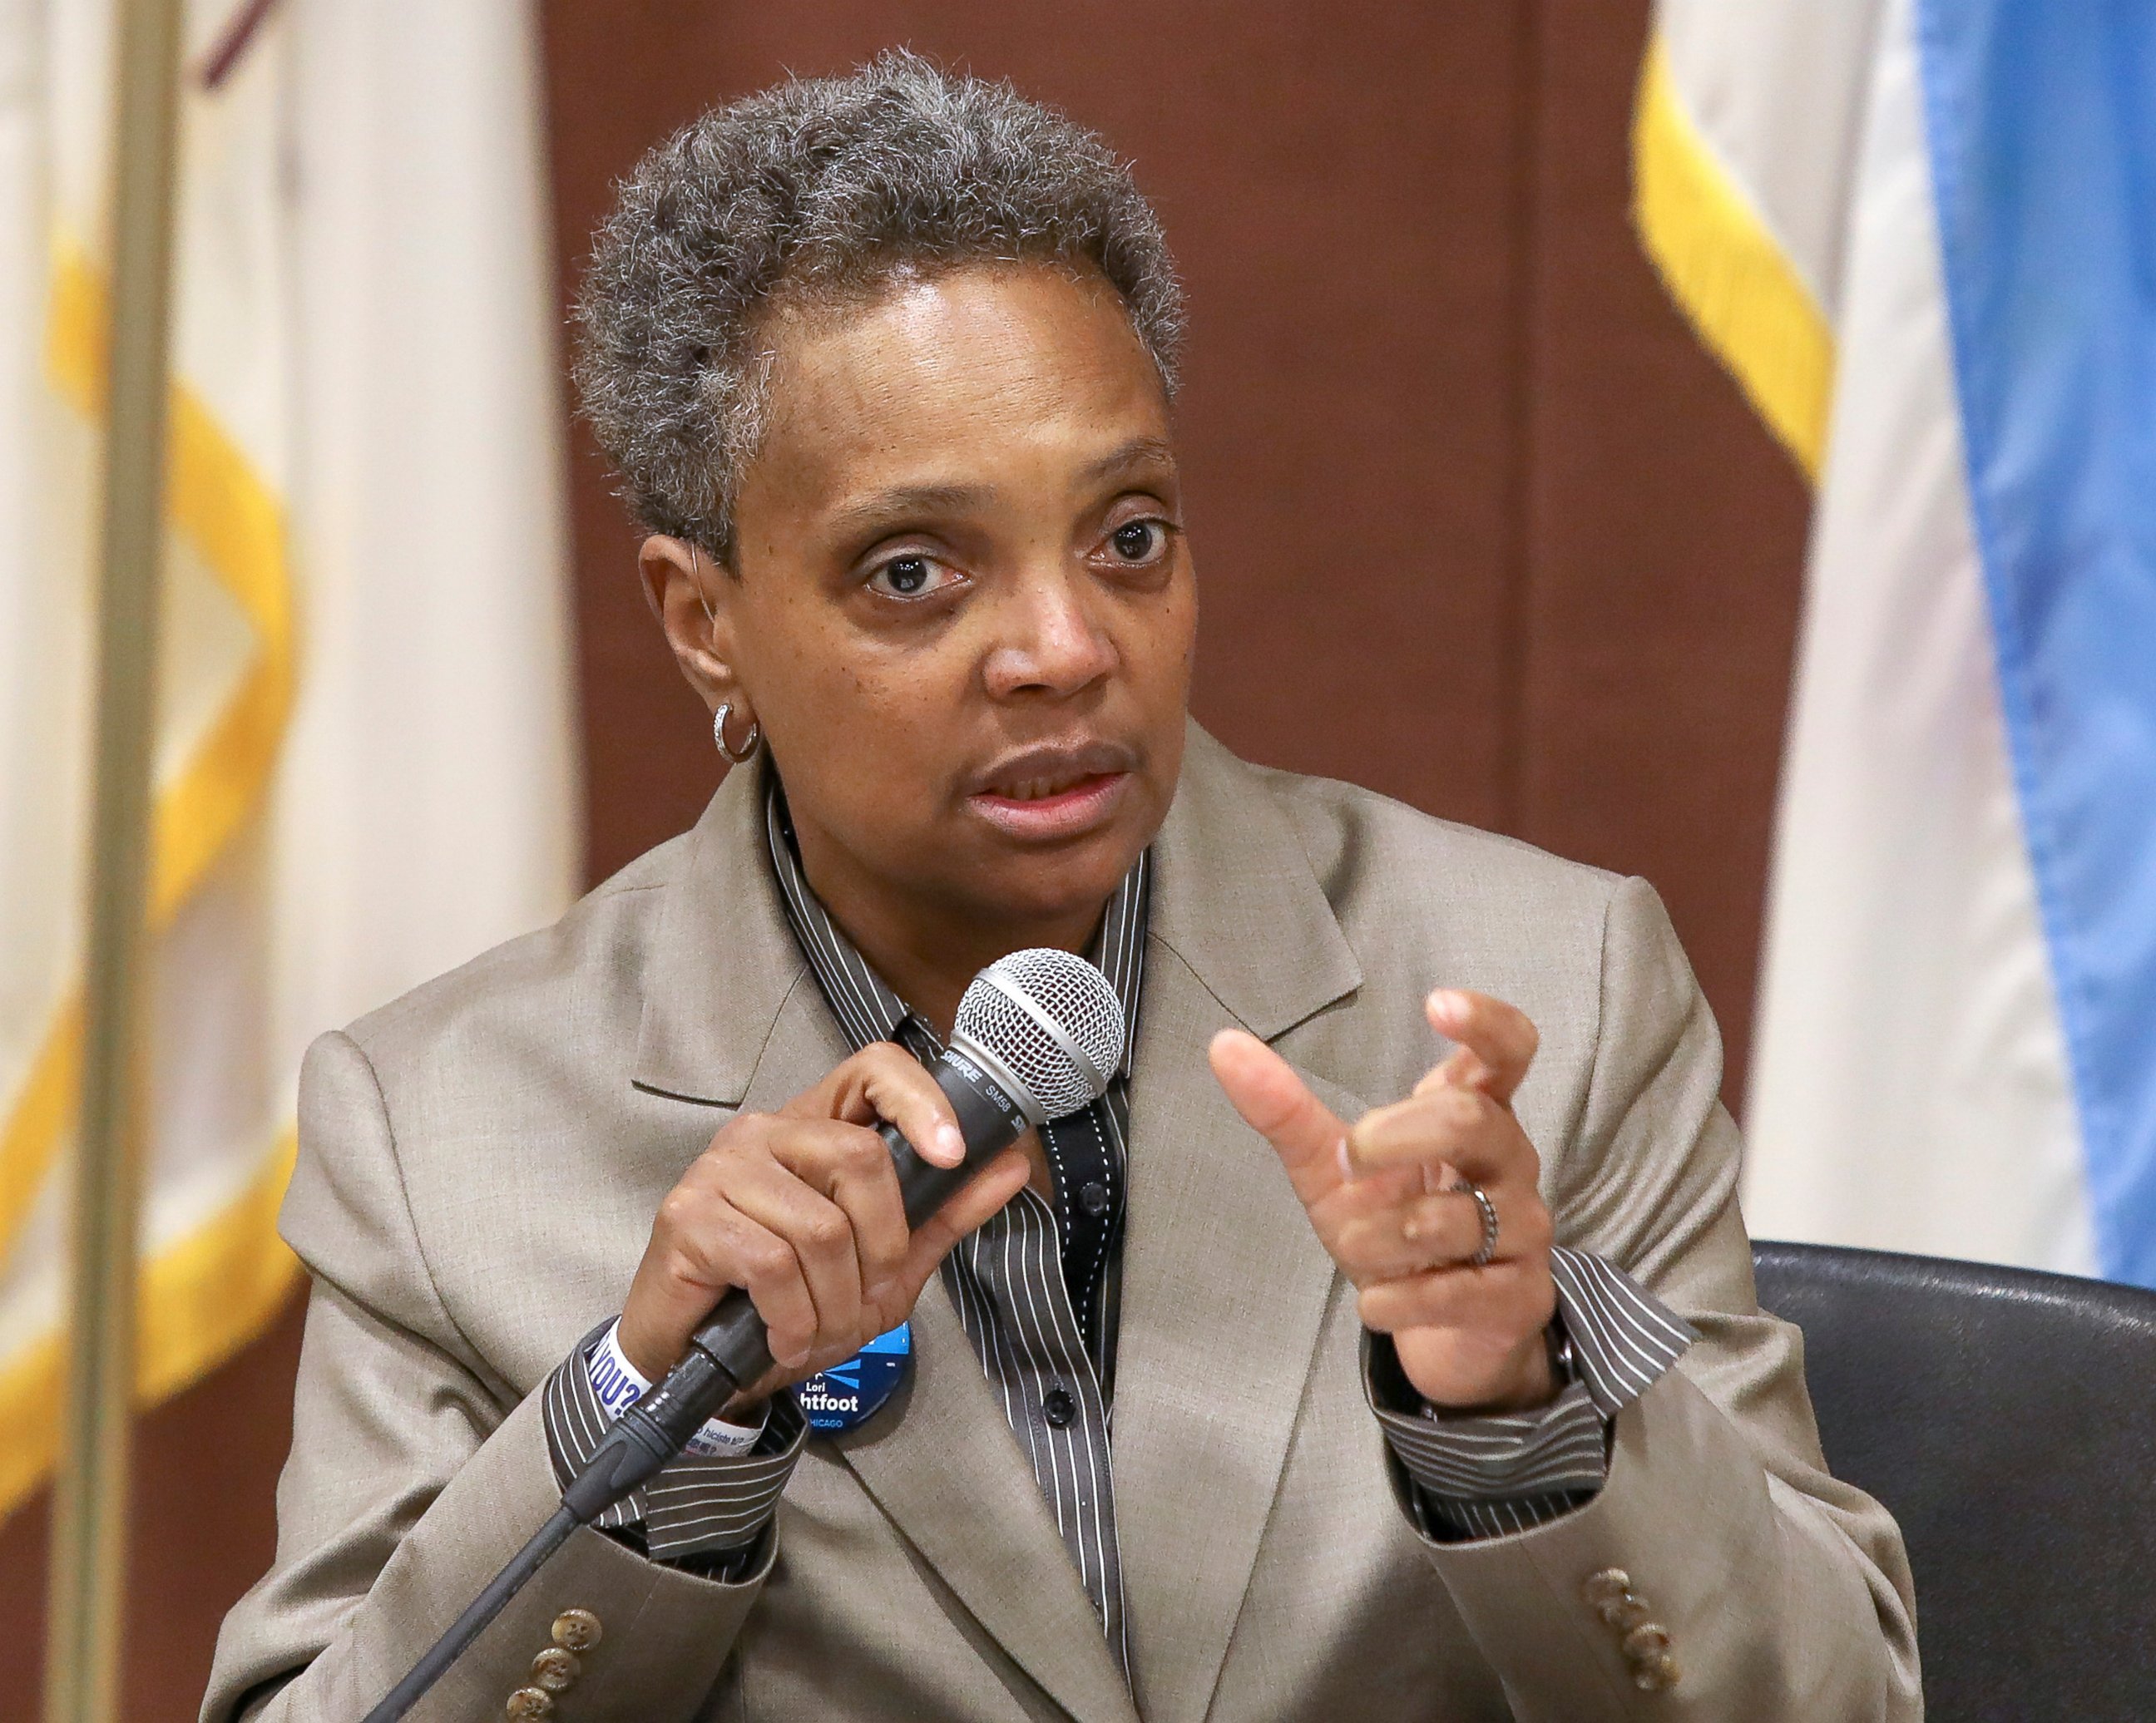 PHOTO: In this March 24, 2019 photo, Chicago mayoral candidate Lori Lightfoot participates in a candidate forum sponsored by One Chicago For All Alliance at Daley College in Chicago. 